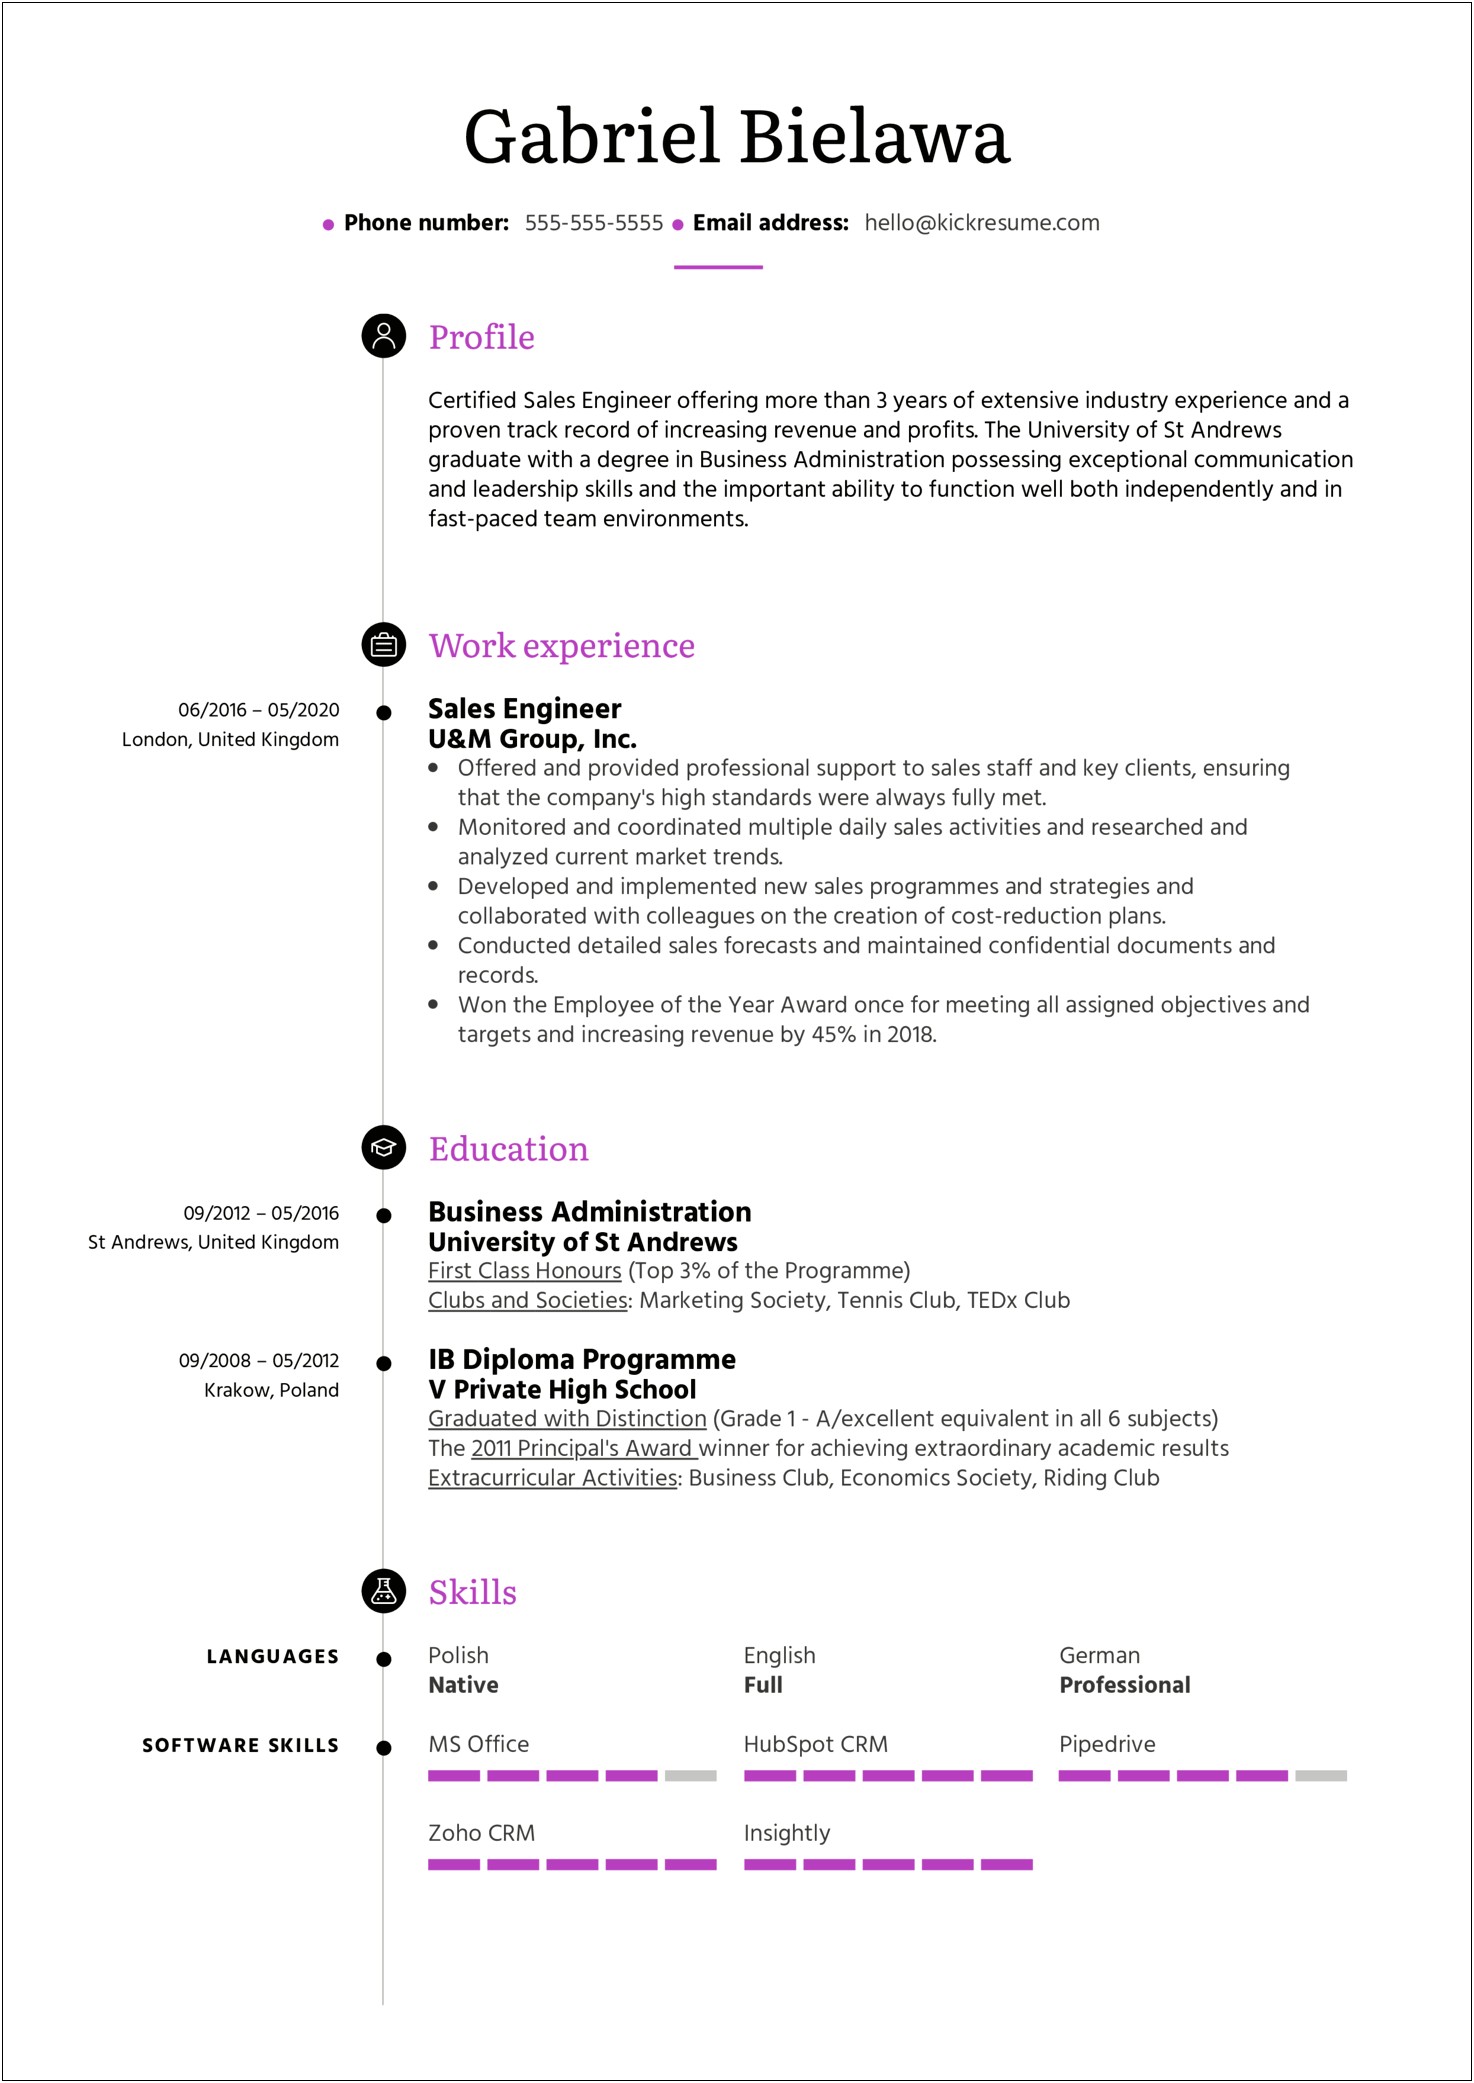 Sales And Service Engineer Resume Sample